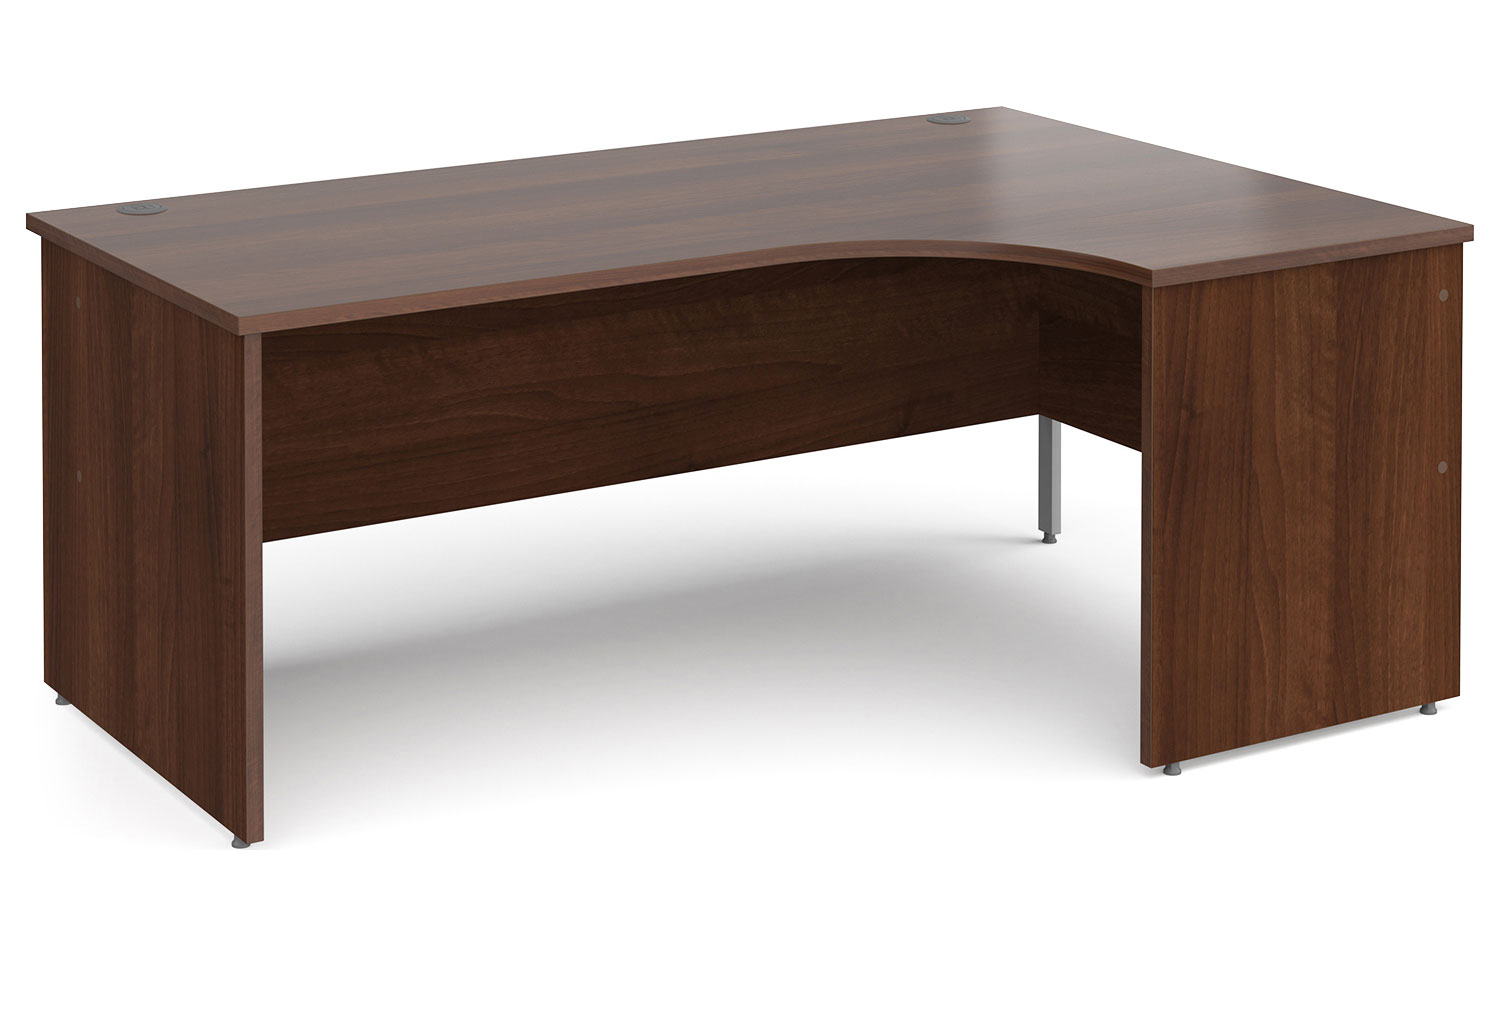 All Walnut Panel End Right Hand Ergonomic Office Desk, 180wx120/80dx73h (cm), Express Delivery